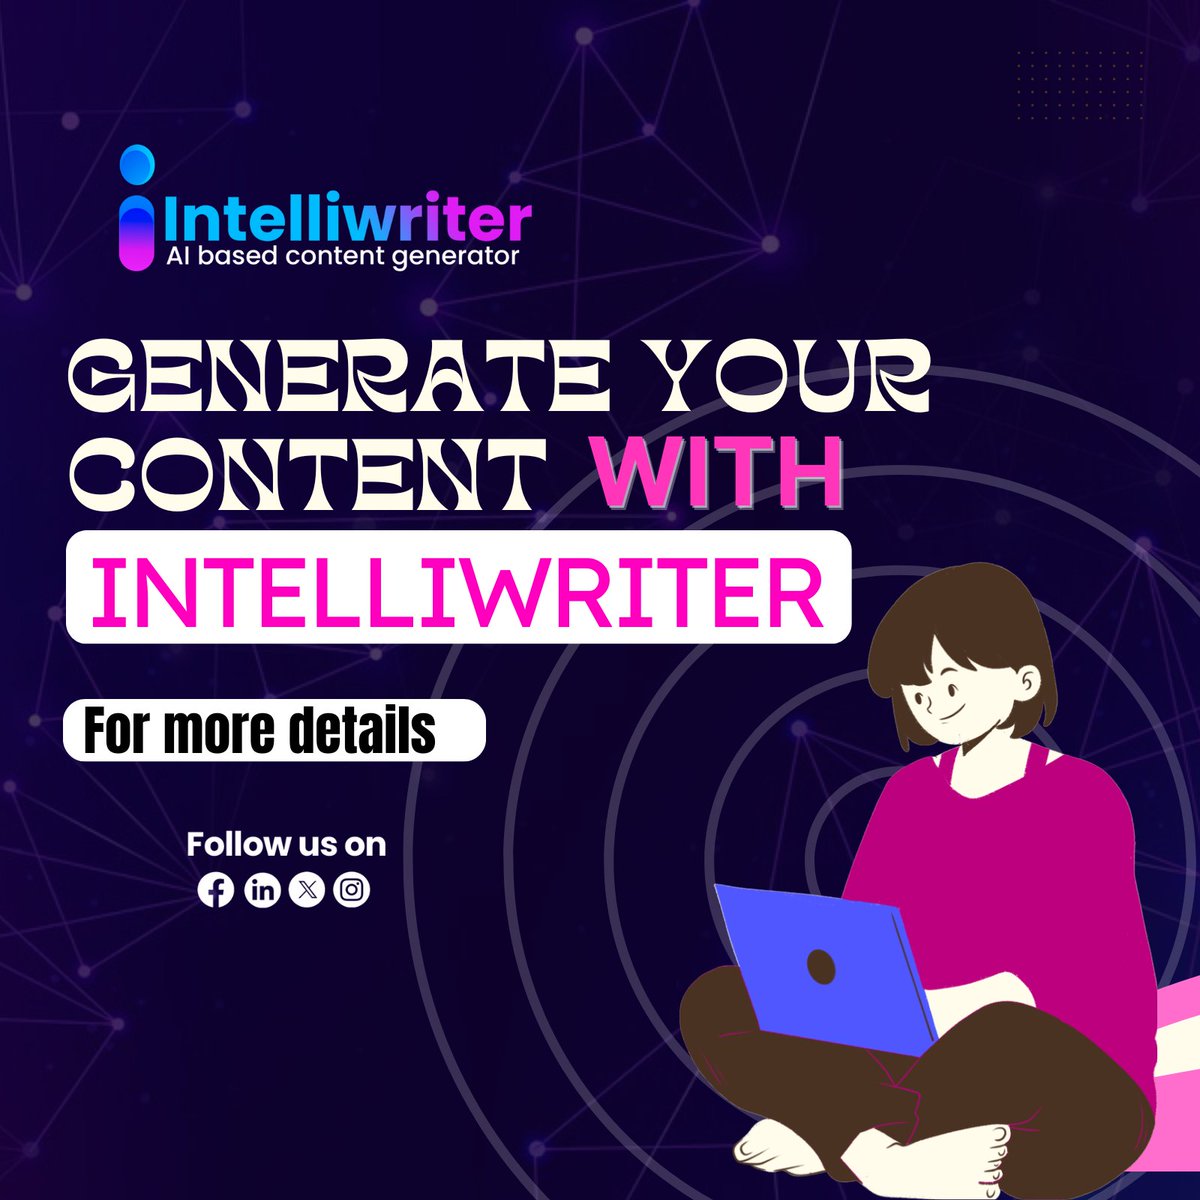 Ready to supercharge your content creation? Look no further than Intelliwriter, the AI-based tool for generating captivating content and stunning images!

Ready to elevate your content game? Try Intelliwriter today!

intelliwriter.io
#Intelliwriter #AIbasedcontentgenerator